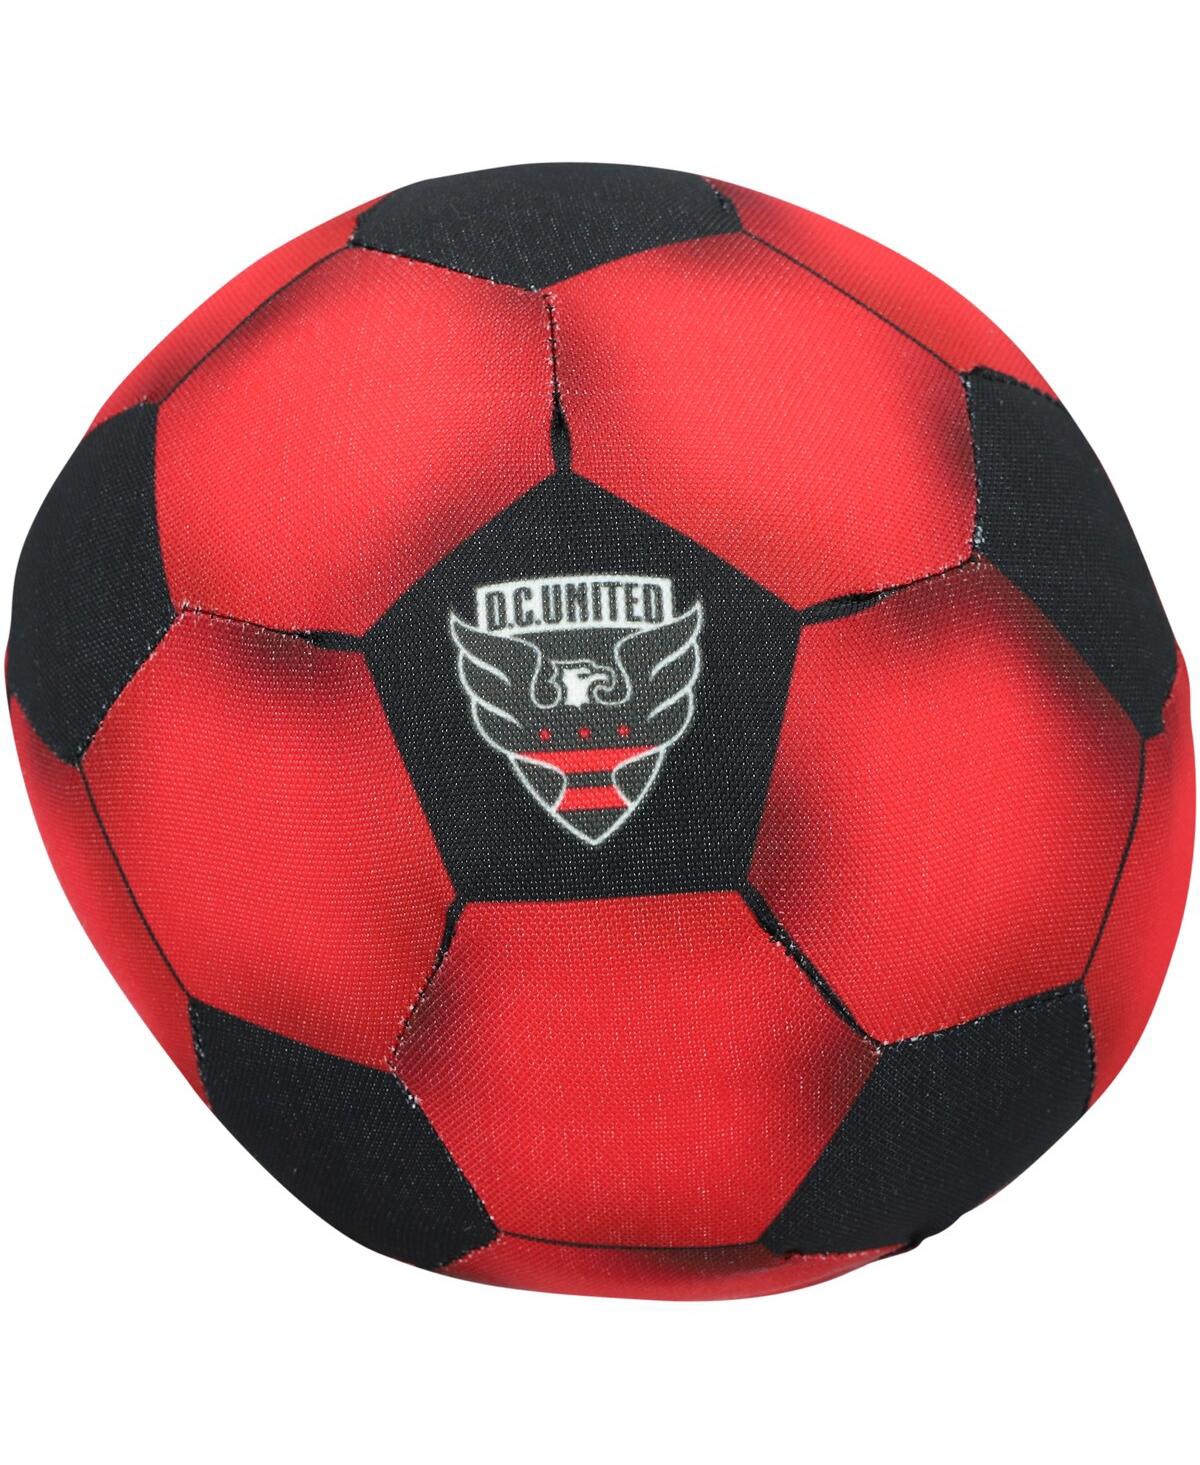 D.c. United Soccer Ball Plush Dog Toy - Red